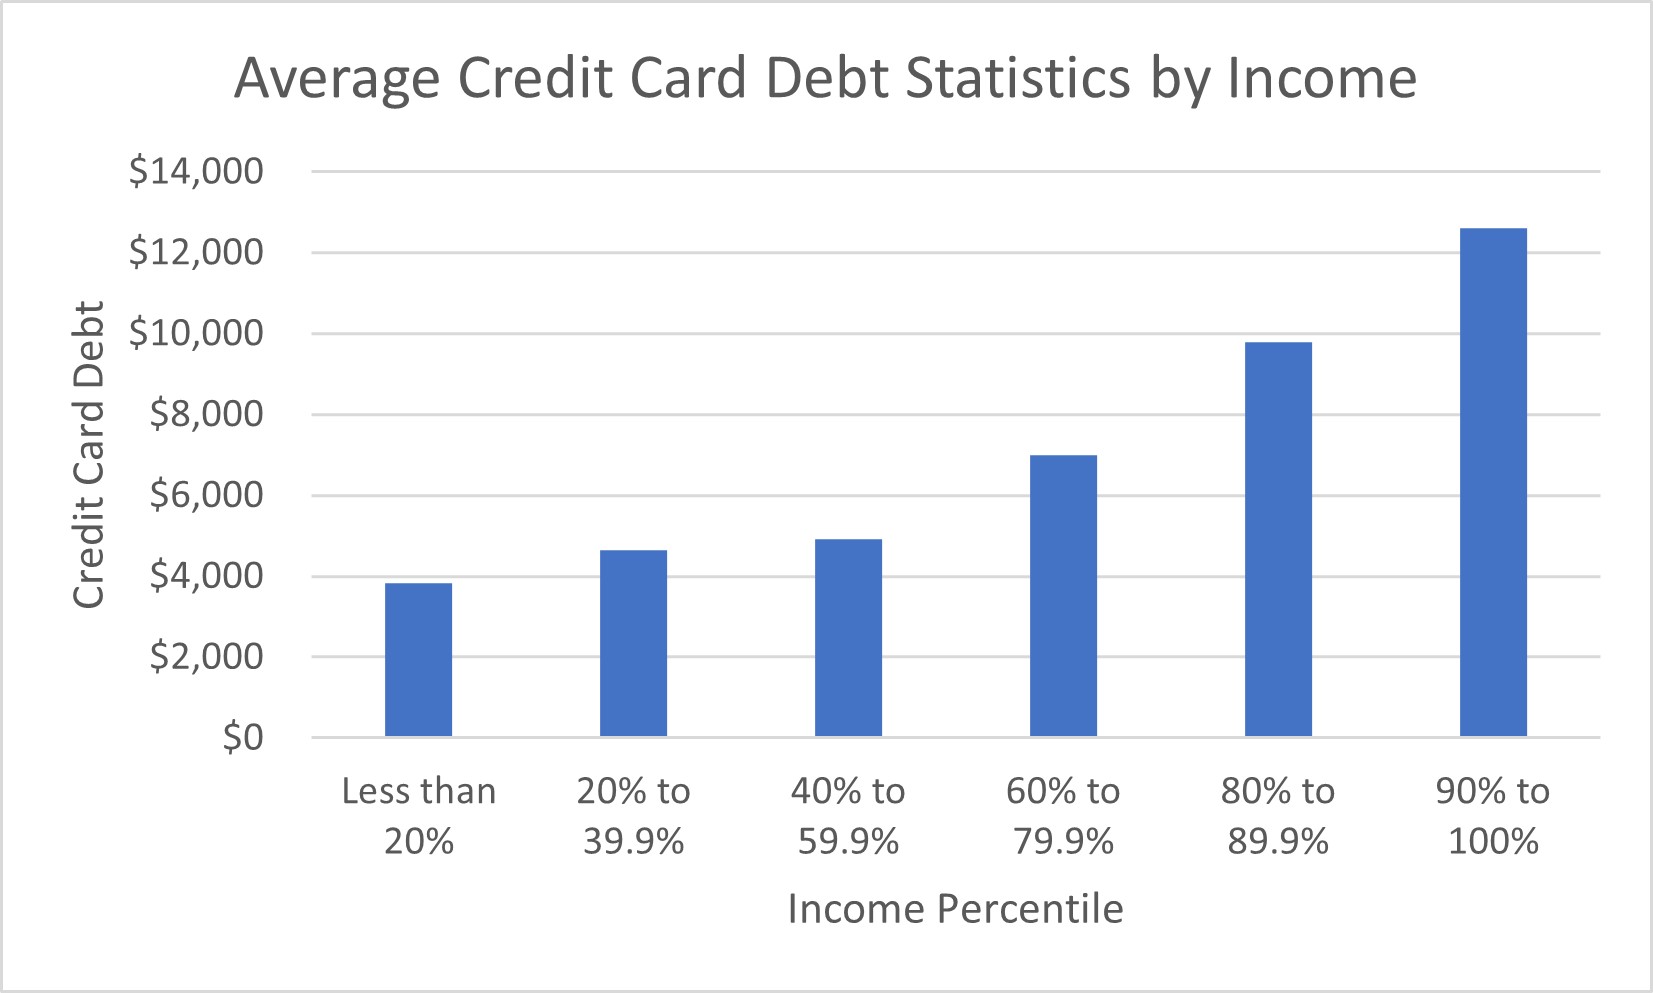 Chart showing the average credit card debt statistics by income.